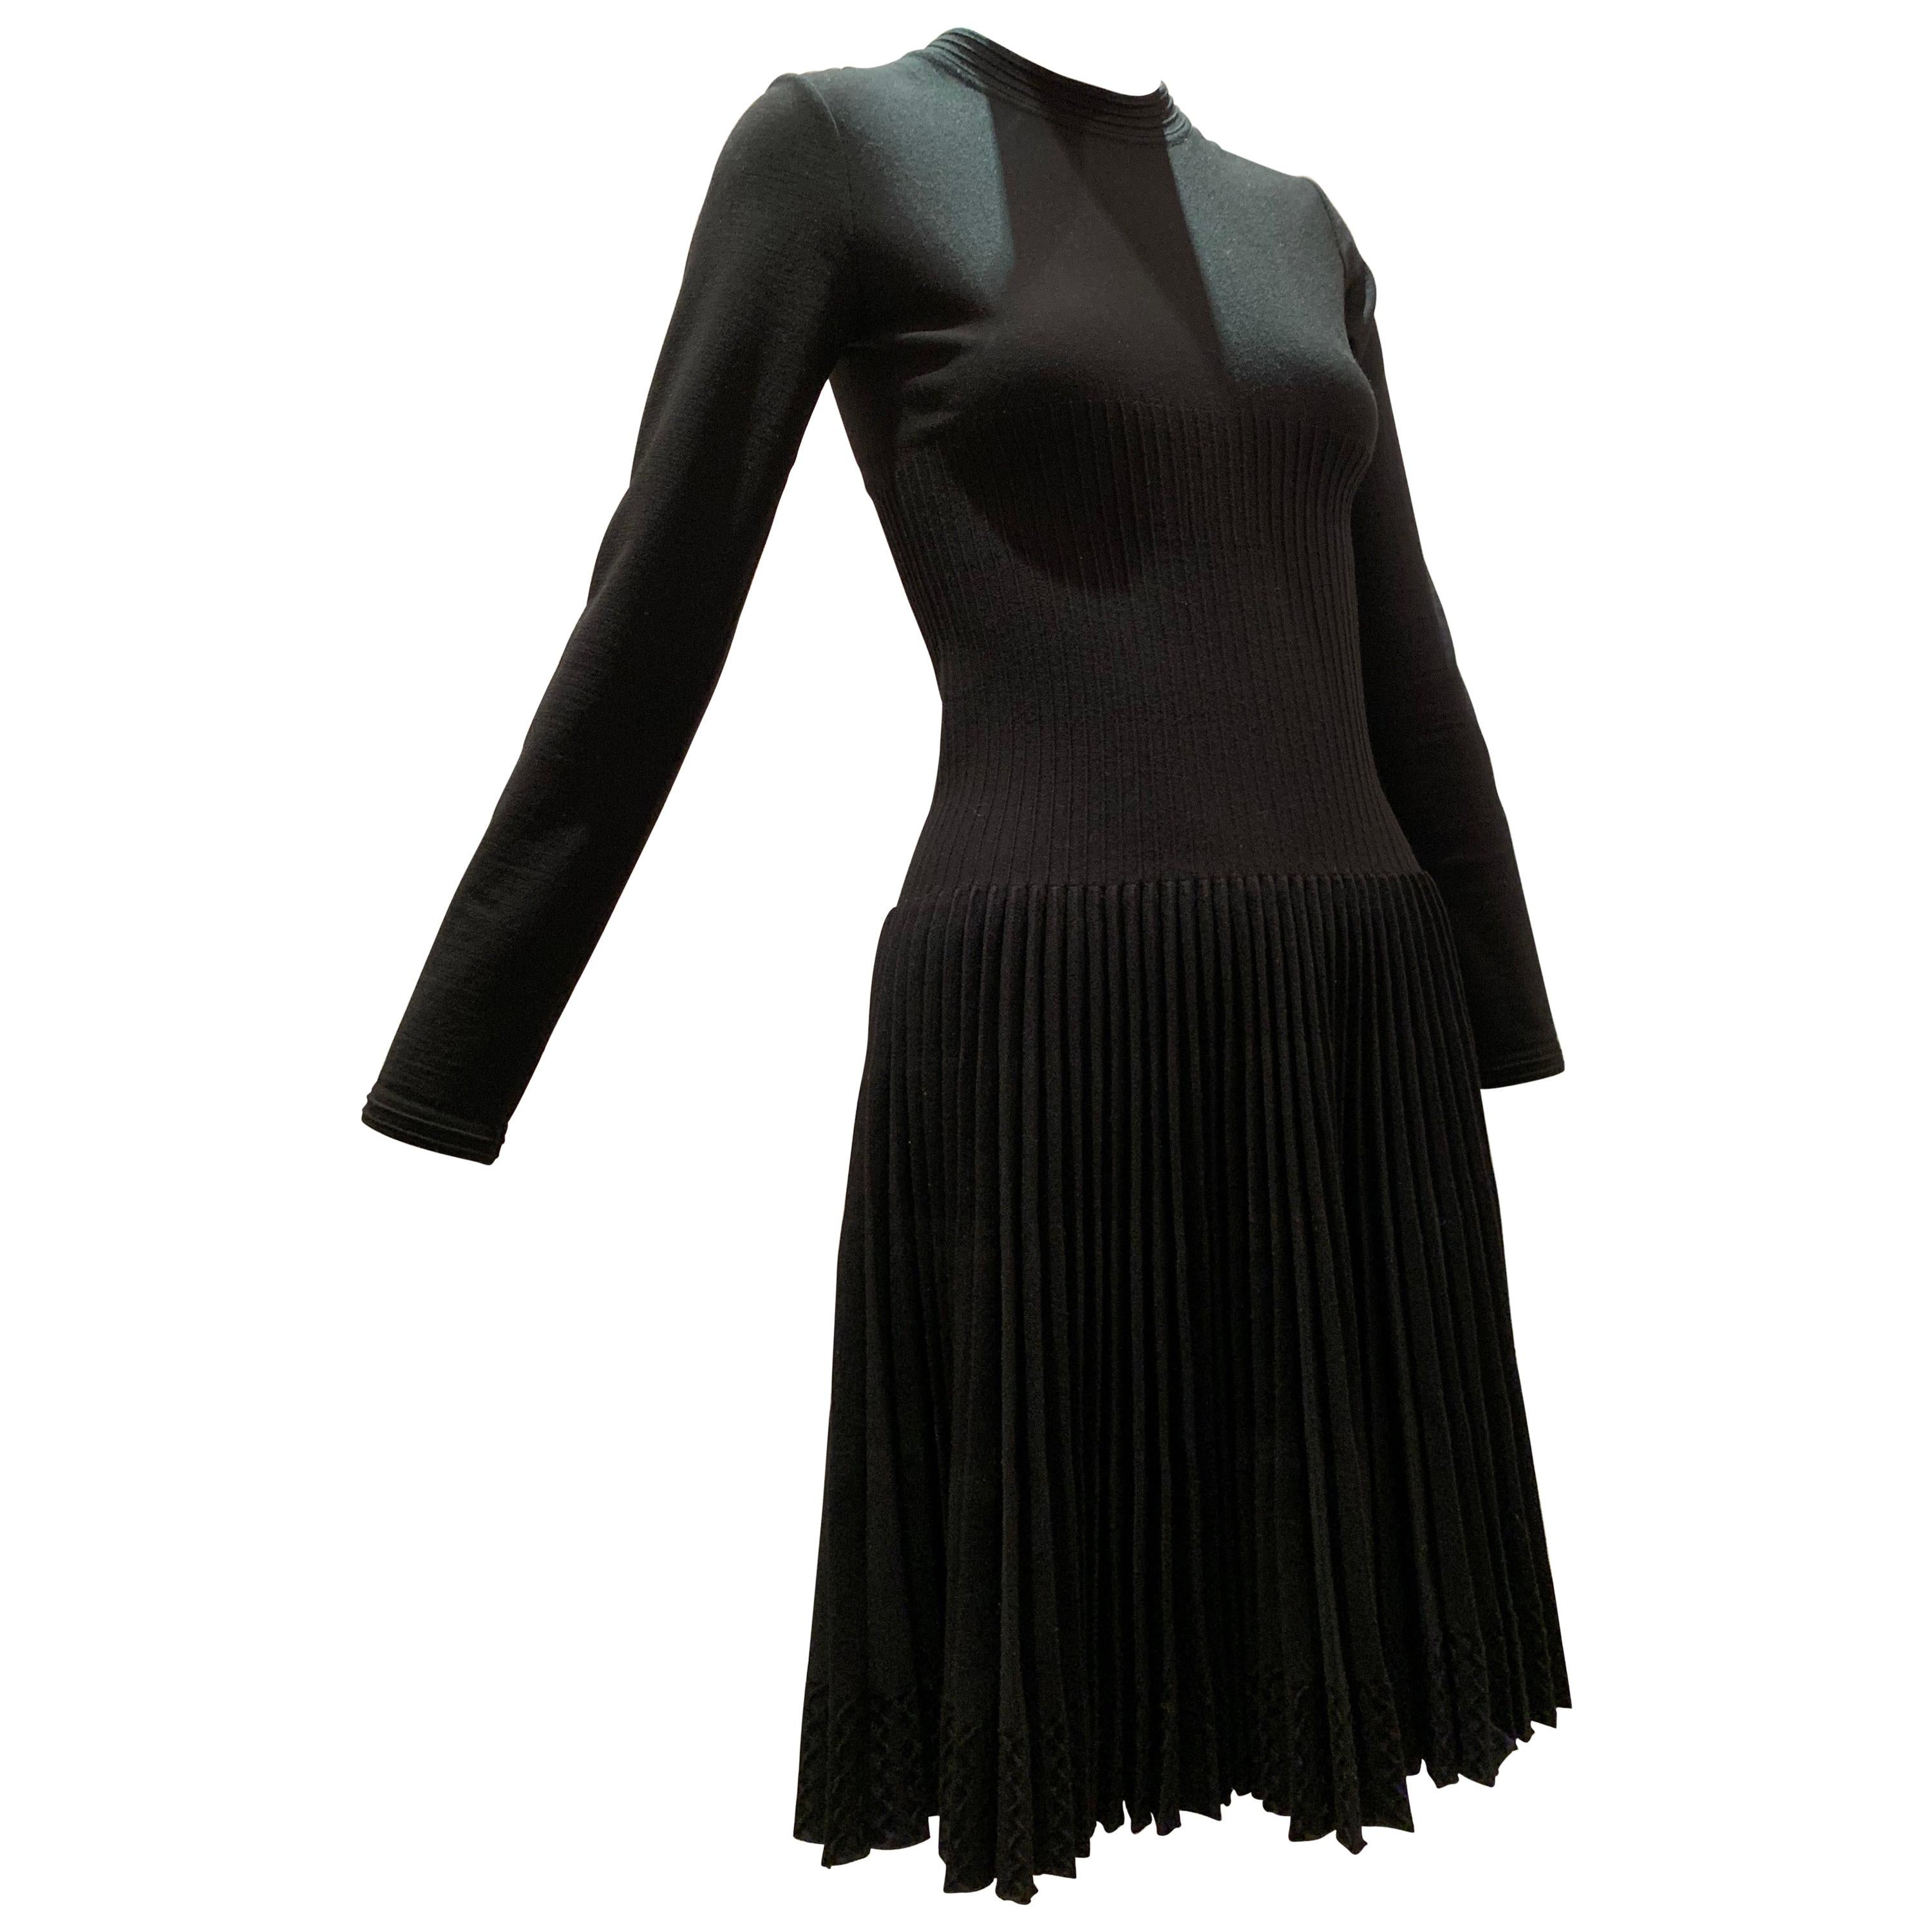 Alaia Black Knit Dress W/ High Neckline Dropped Waist and Pleated Flared Skirt